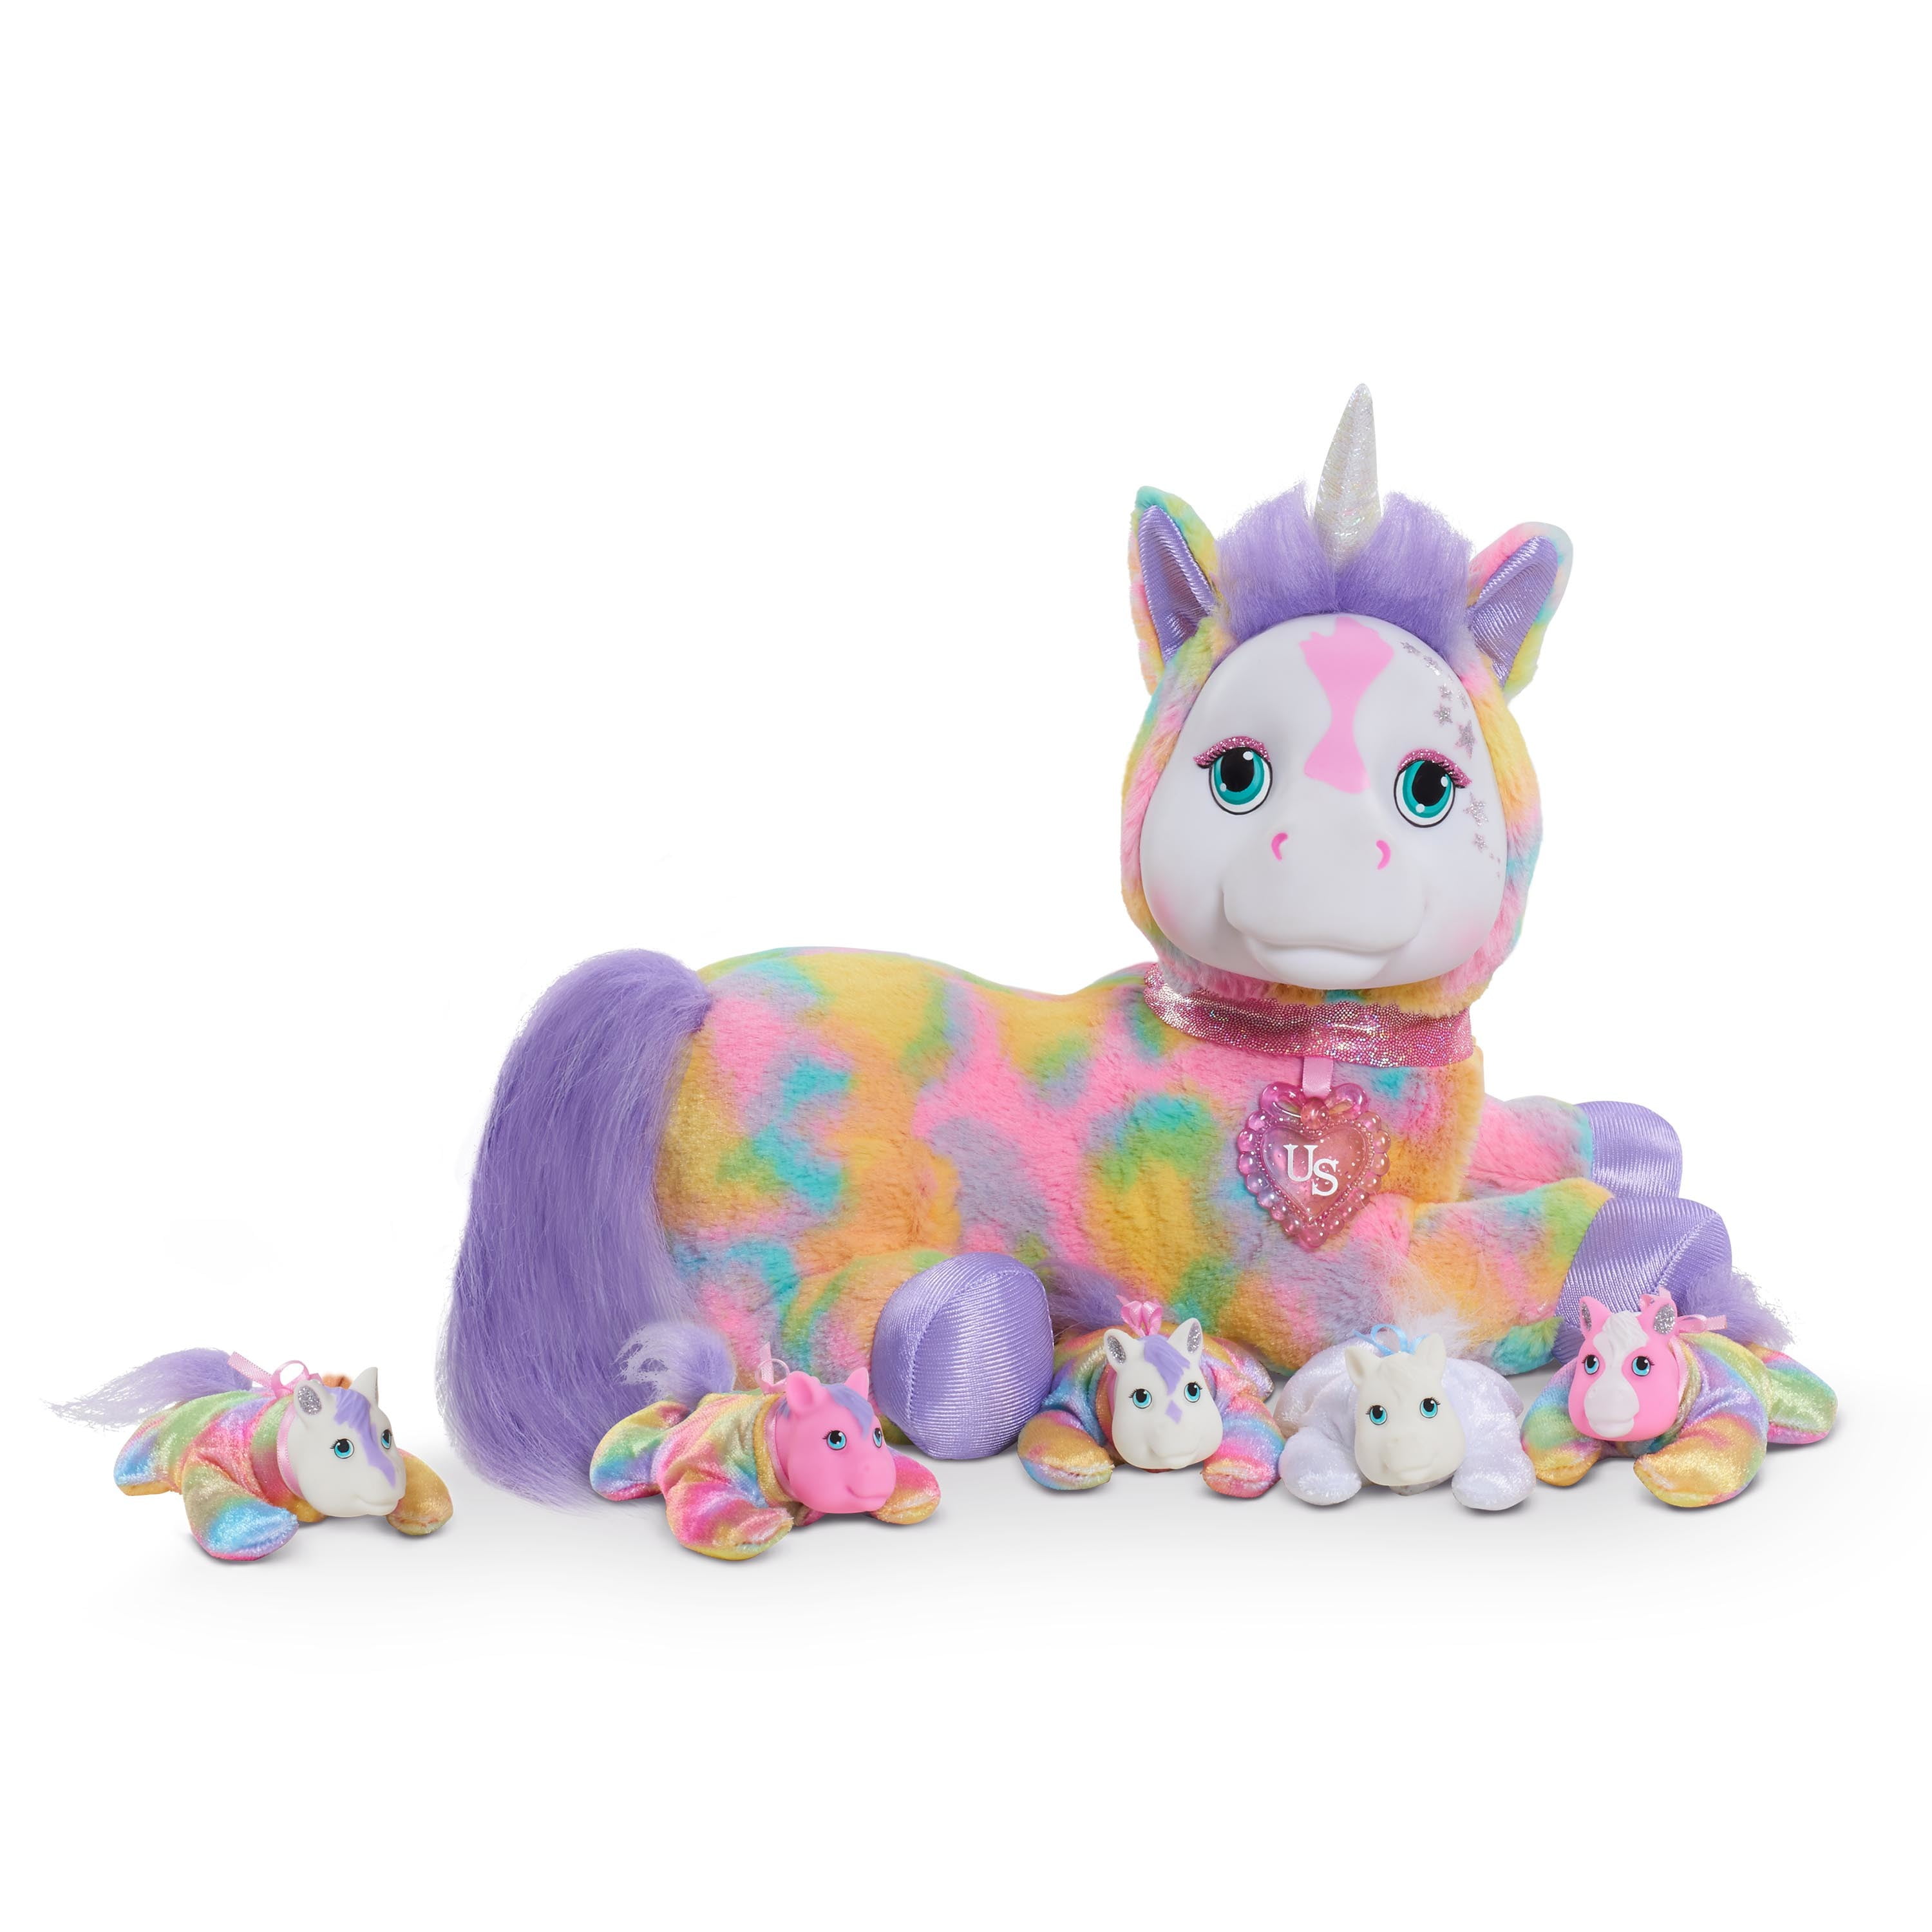 FINGERLINGS PINK UNICORN SKYE WOWWEE TOYS R US EXCLUSIVE Hard TO Find 